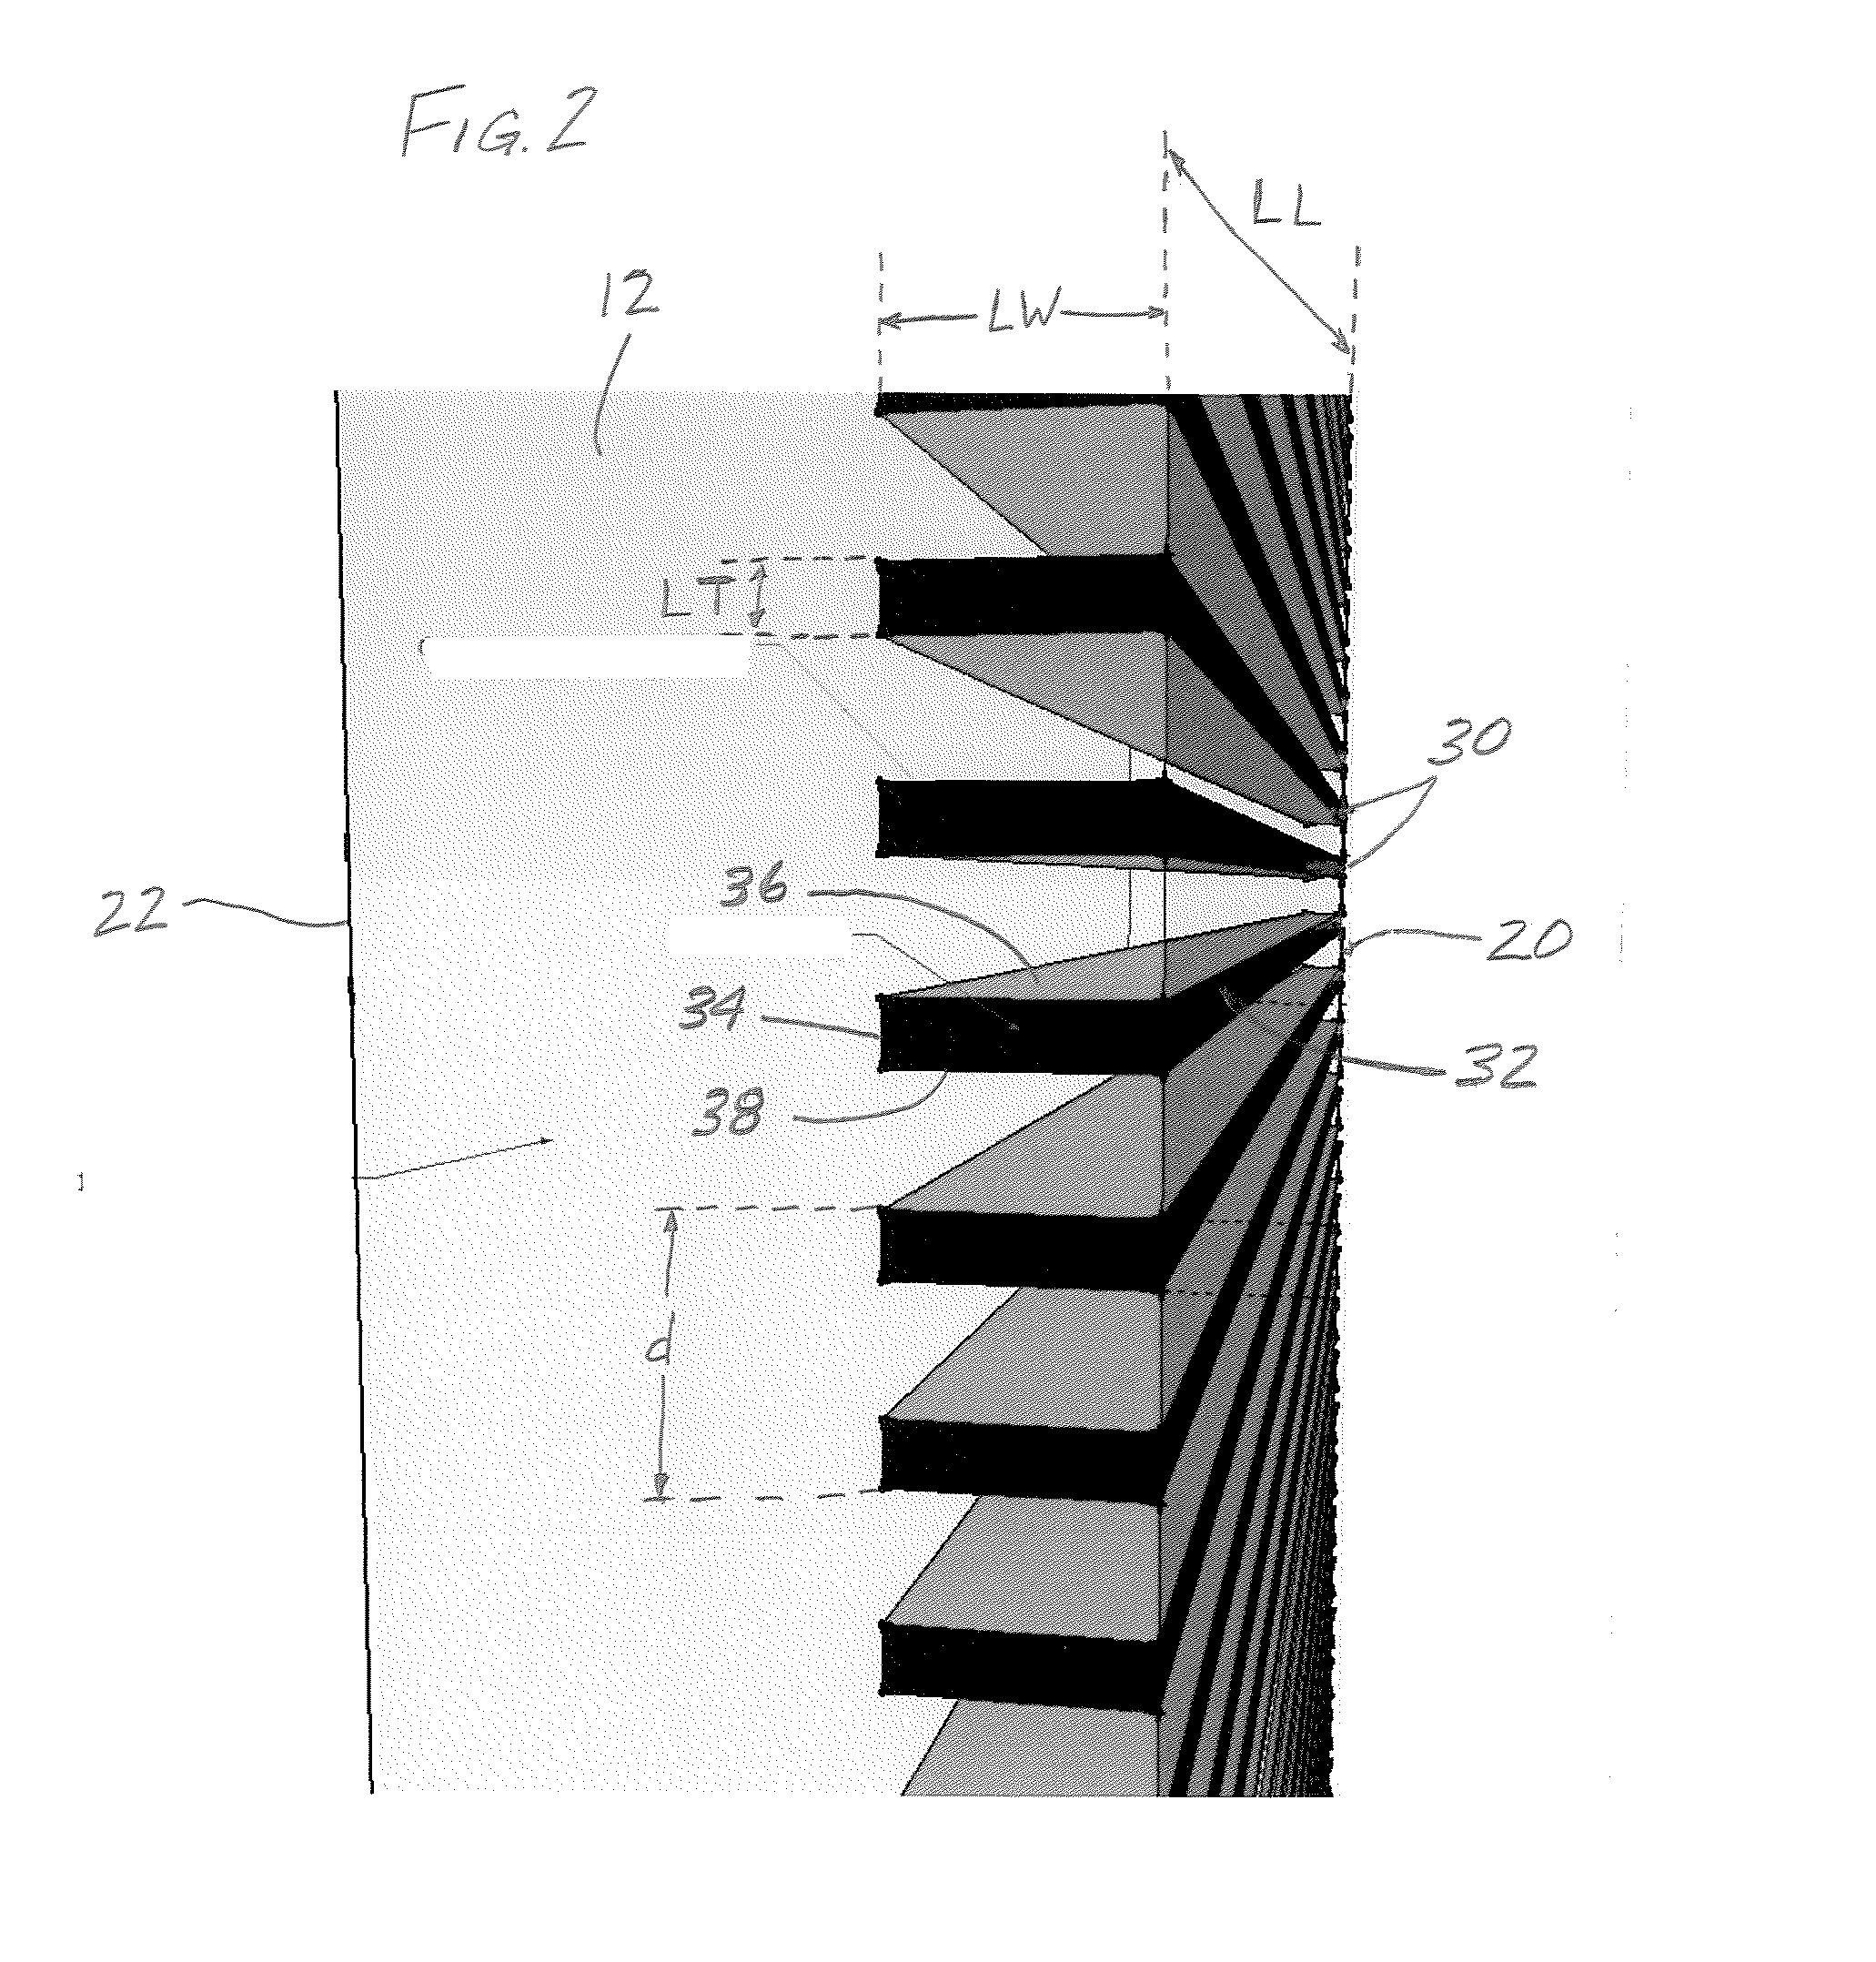 Apparatus and method for solar heat gain reduction in a window assembly